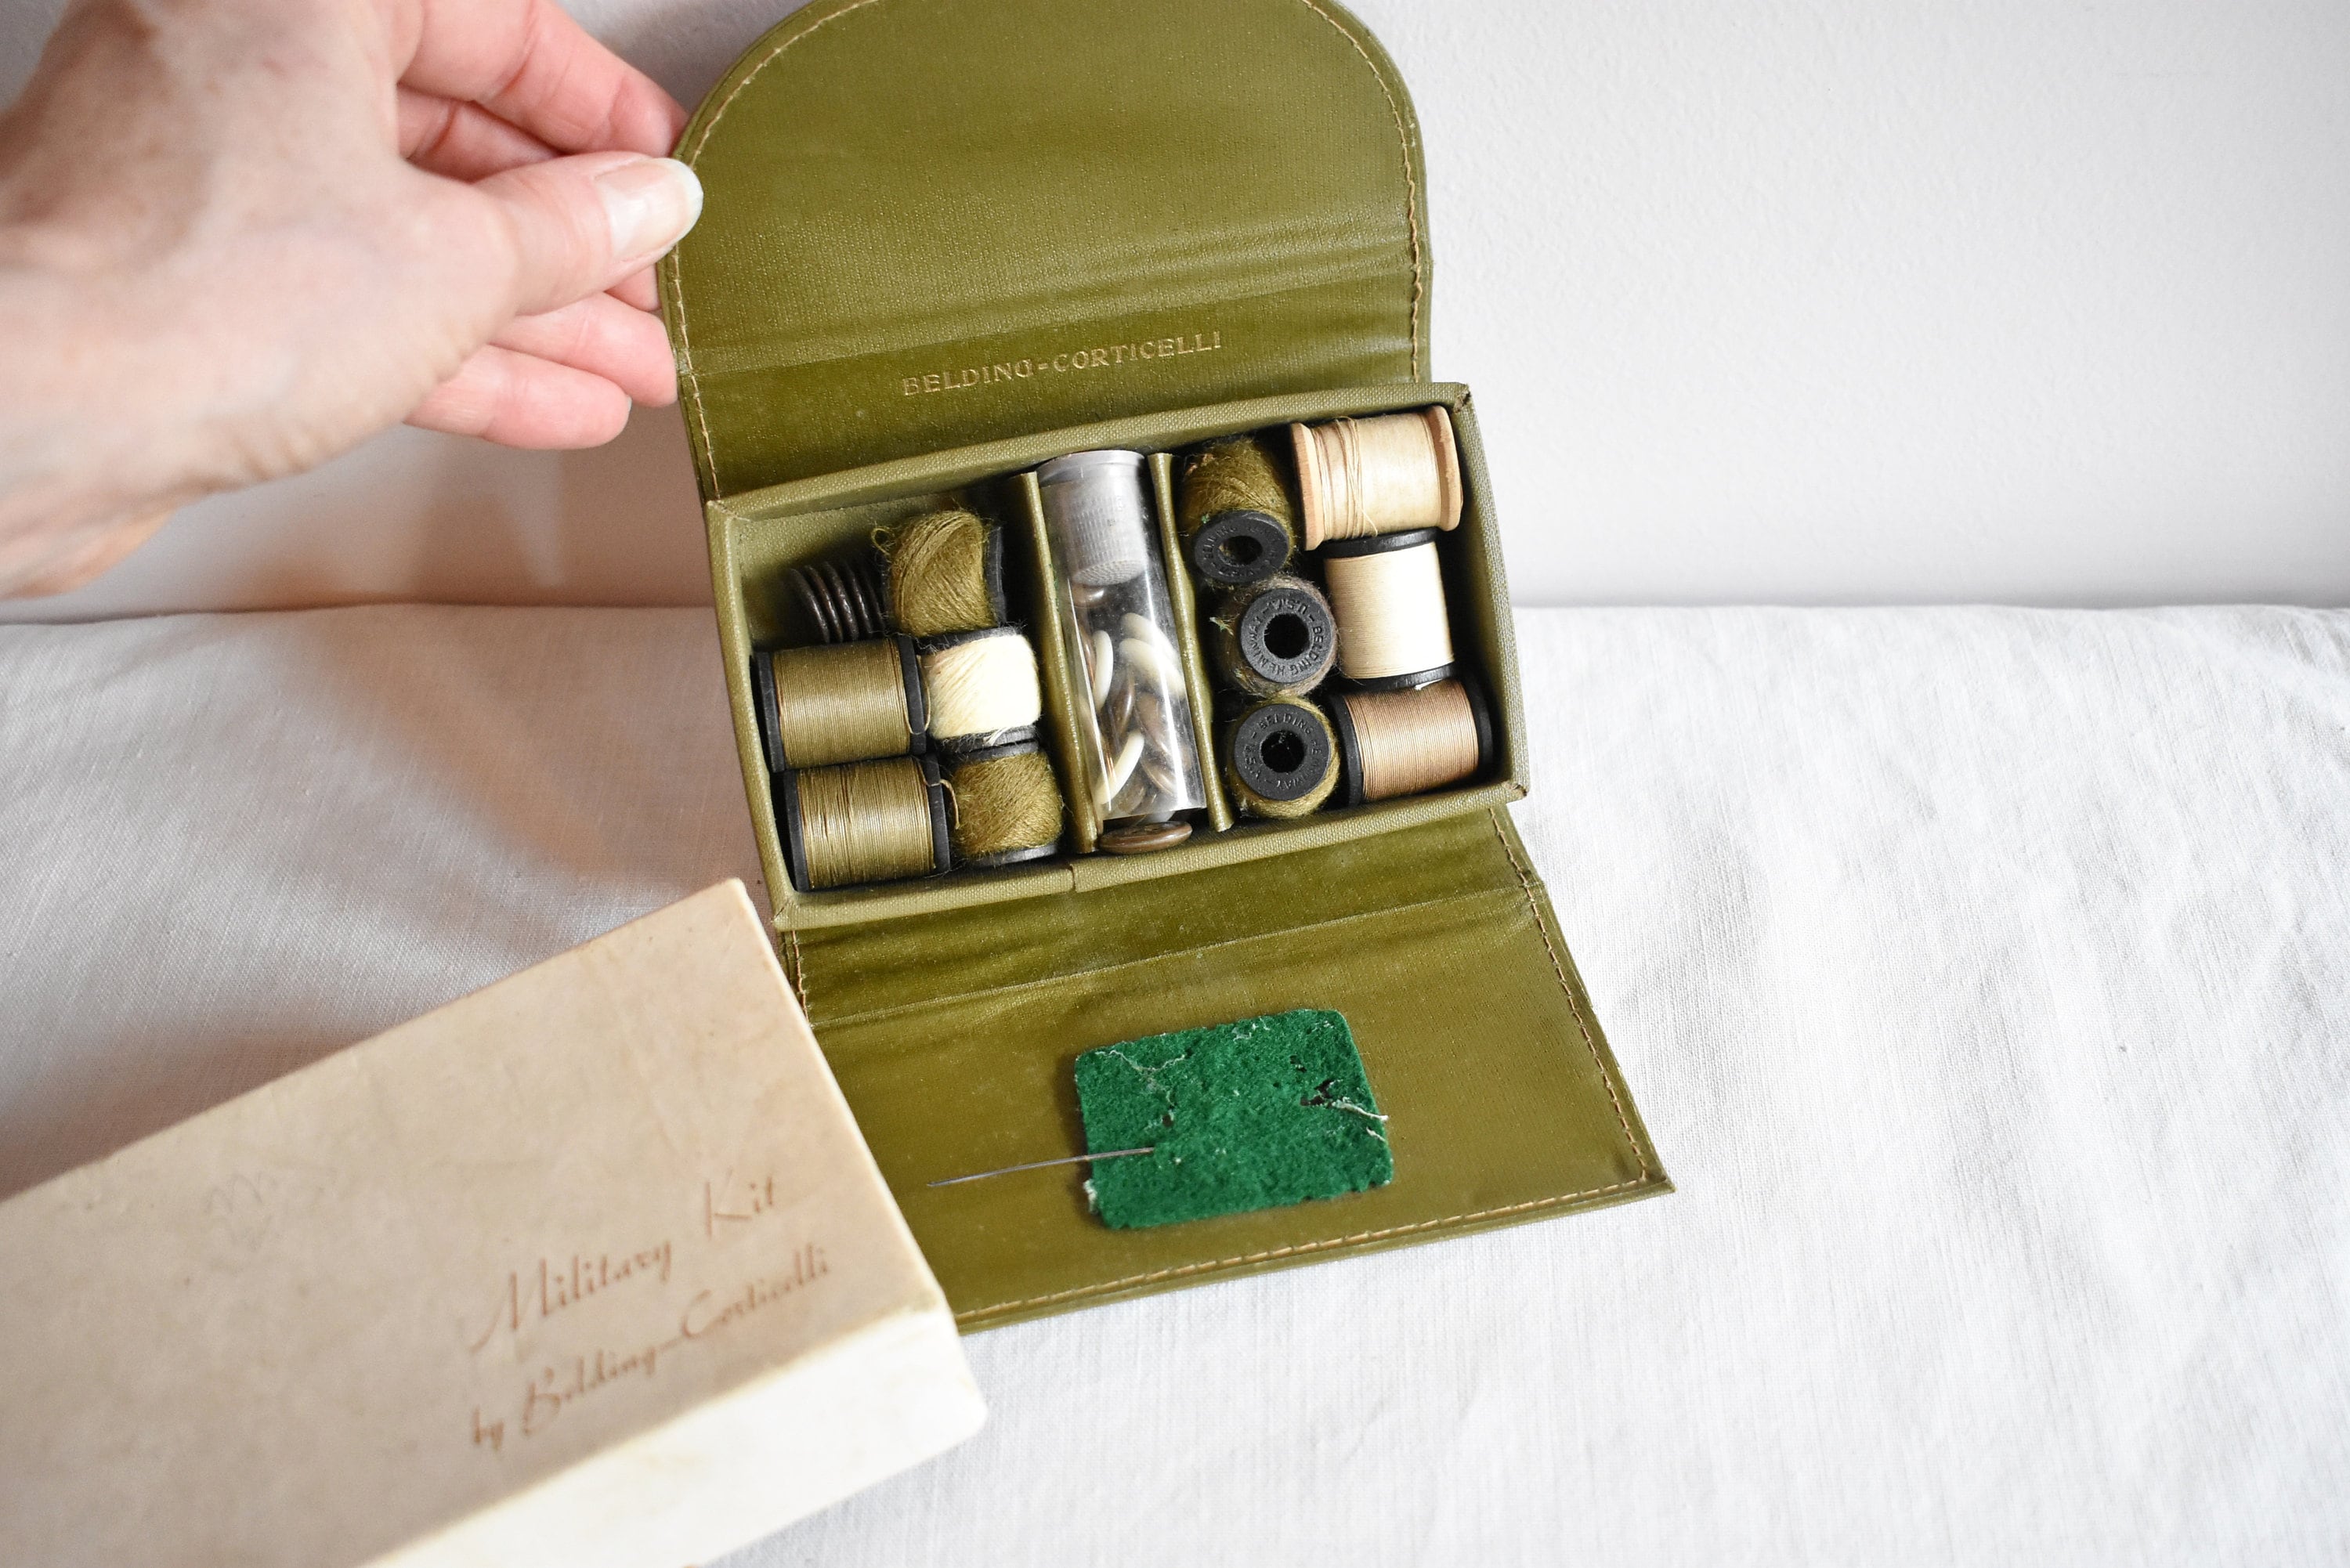 Sewing Kit Used in World War II – Madison Historical